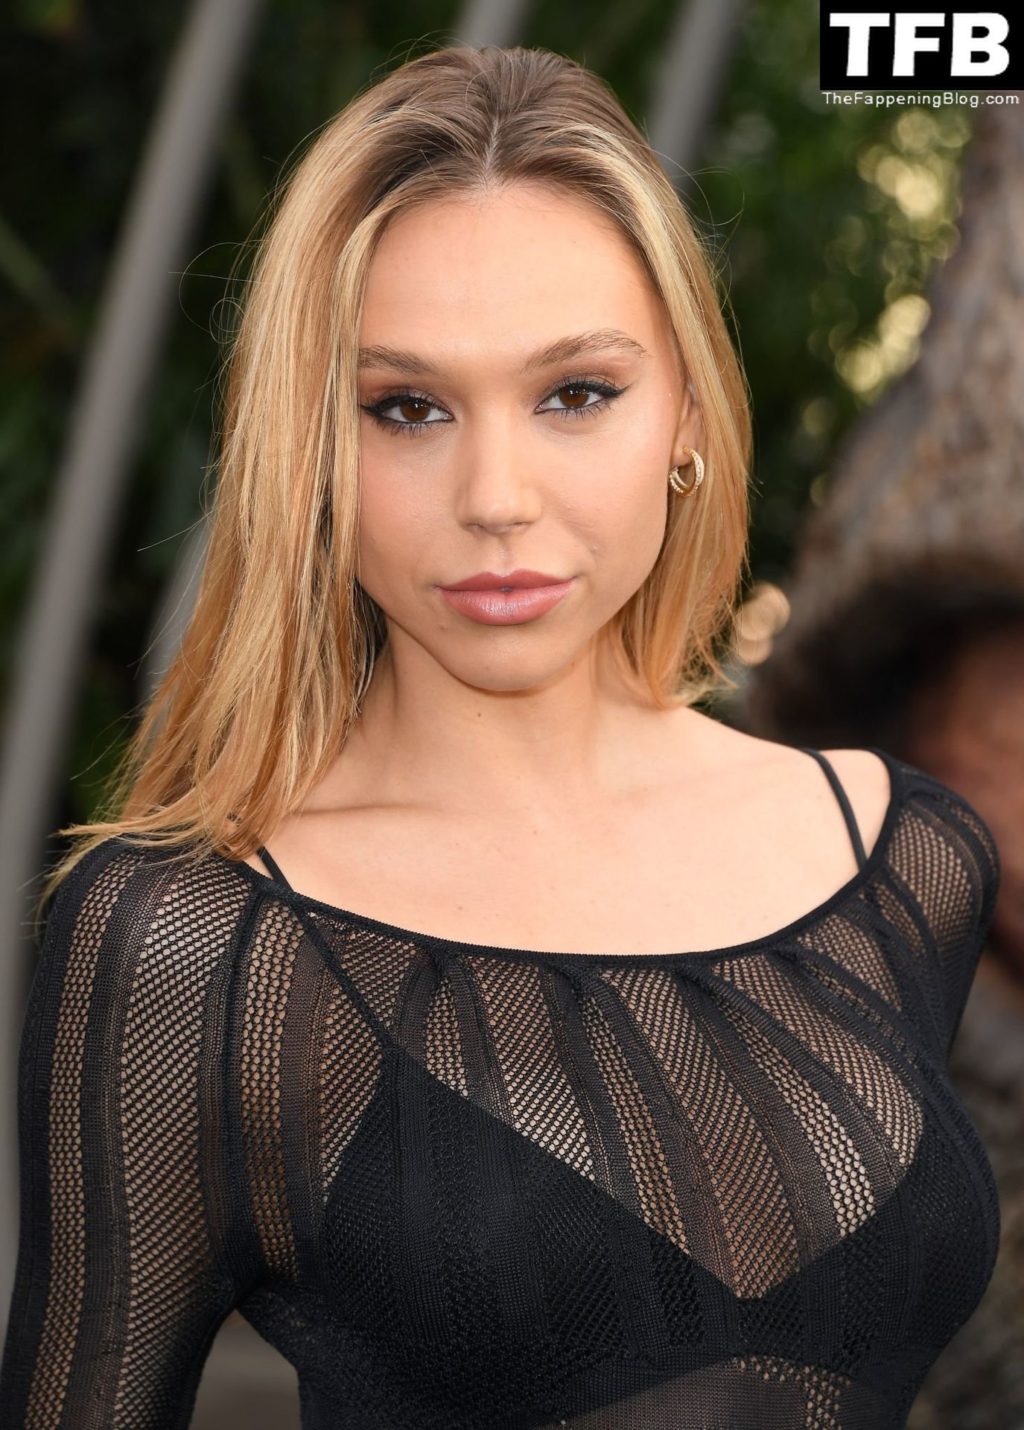 Alexis Ren Sexy The Fappening Blog 14 1024x1430 - Alexis Ren Displays Her Slender Figure in a See-Through Dress at the “Jurassic World: Dominion” Premiere (41 Photos)